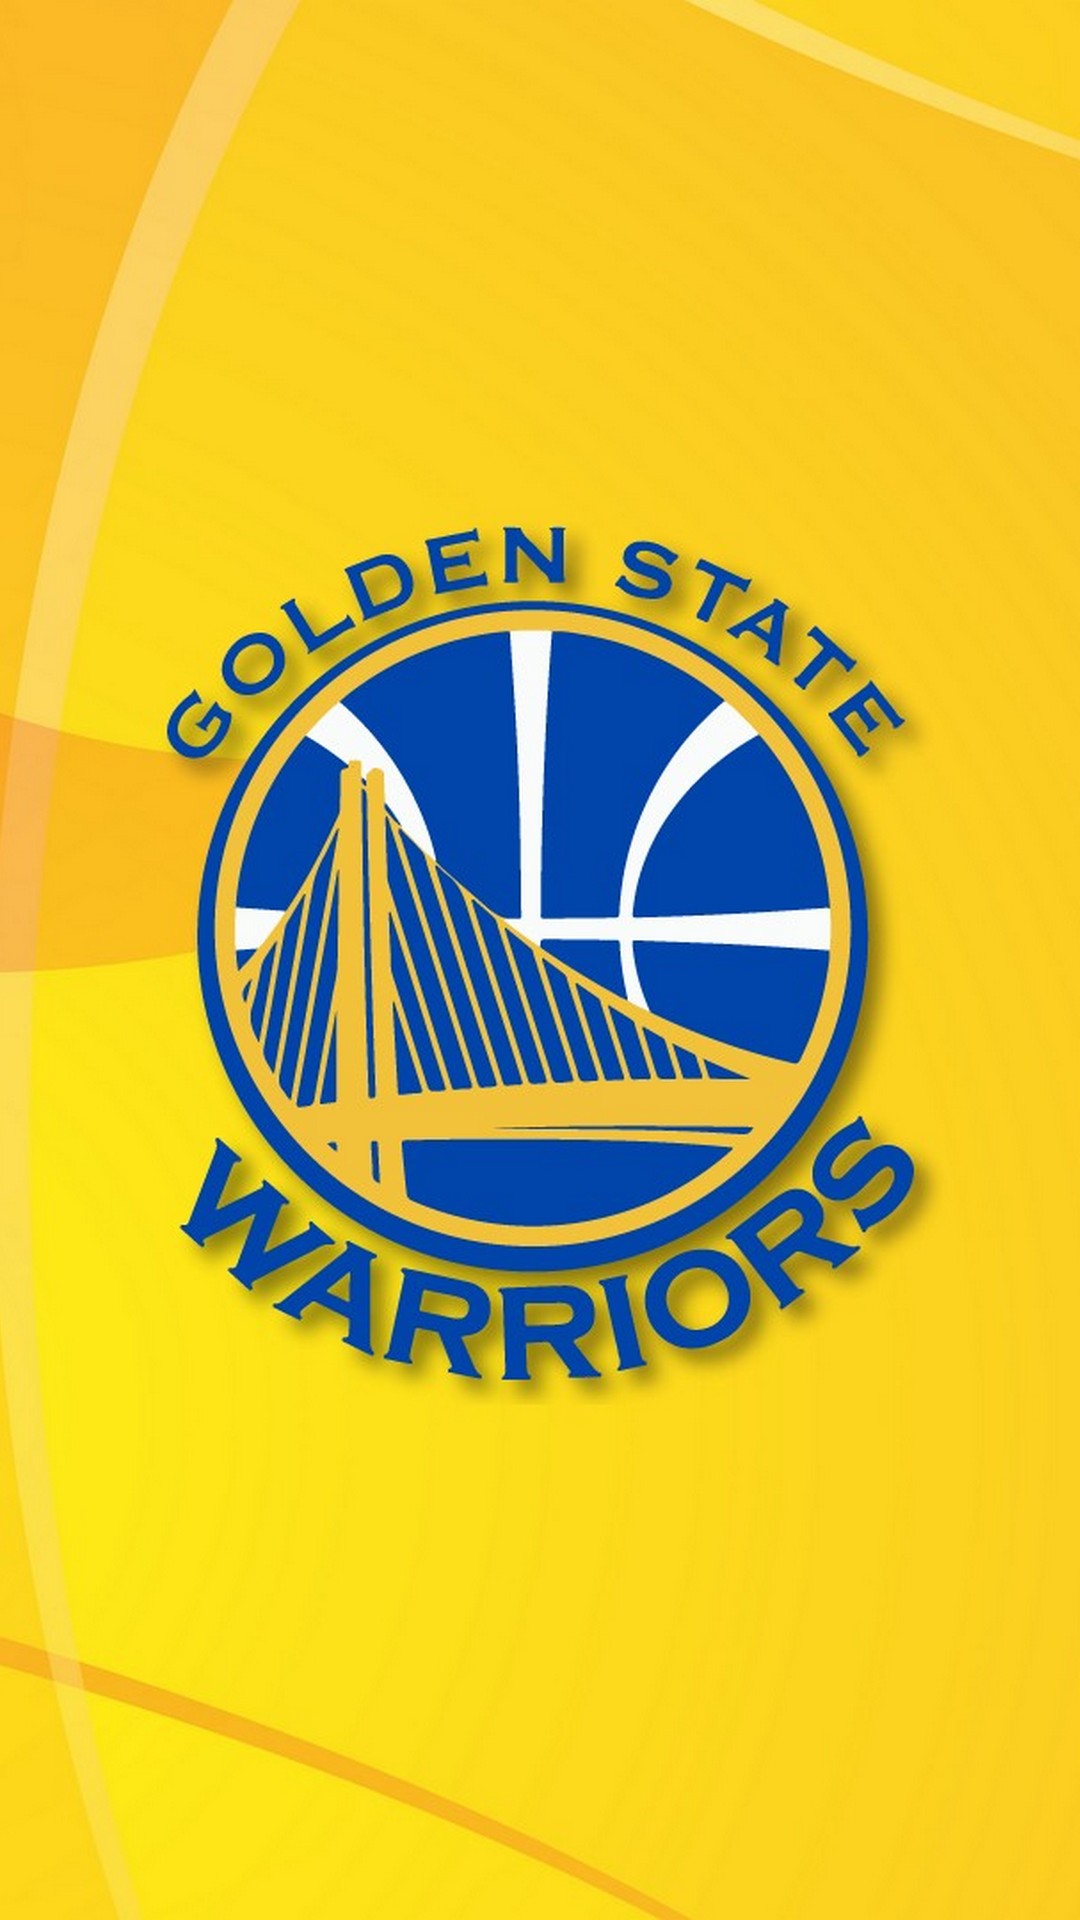 Wallpaper Golden State Warriors iPhone with image resolution 1080x1920 pixel. You can use this wallpaper as background for your desktop Computer Screensavers, Android or iPhone smartphones